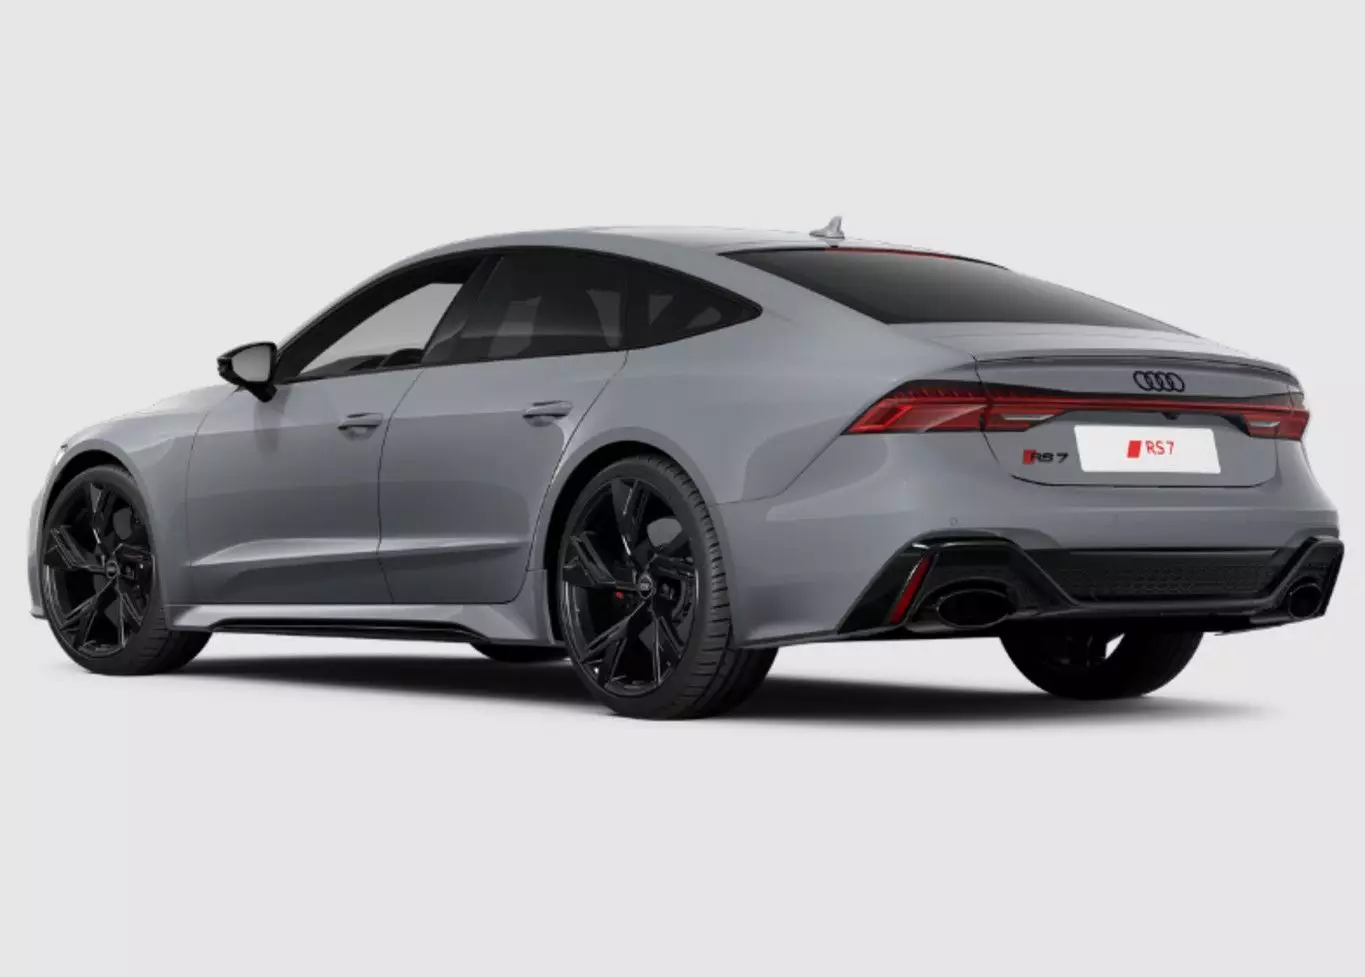 Audi A7 exterior - Rear Right Angled